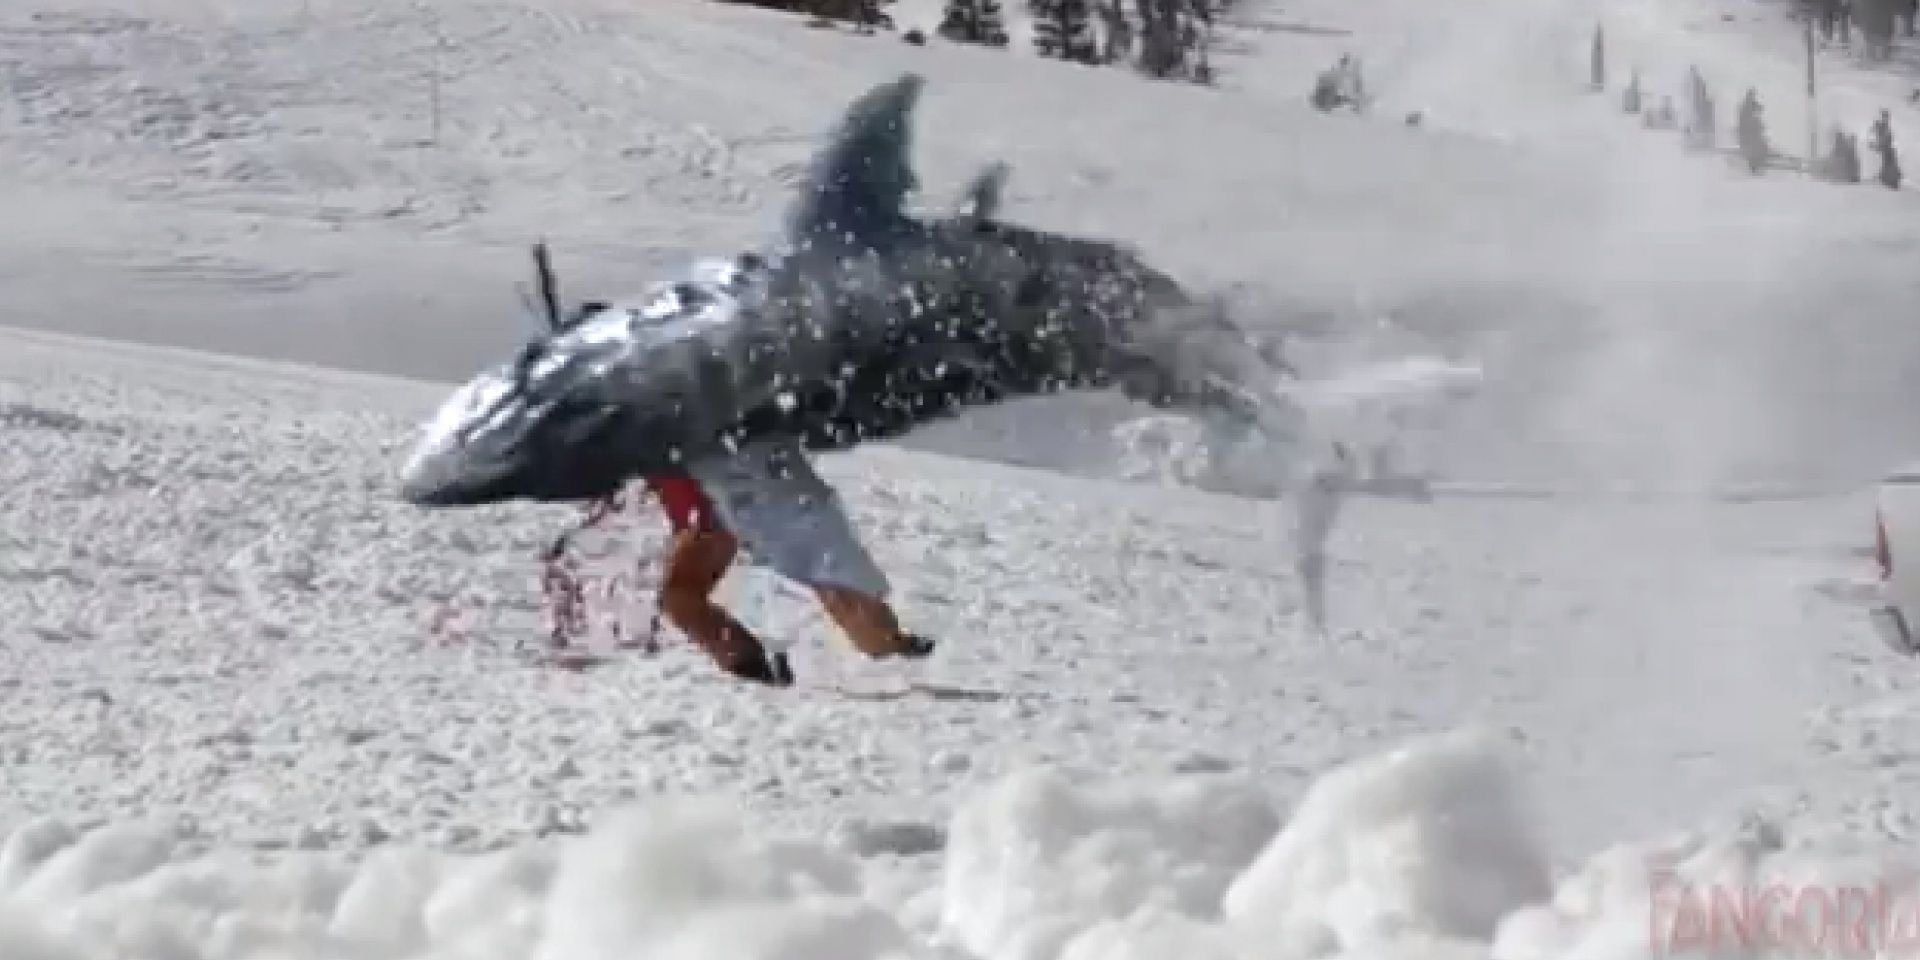 Avalanche Sharks Shark jumping out of snow and attacking skiier Cropped